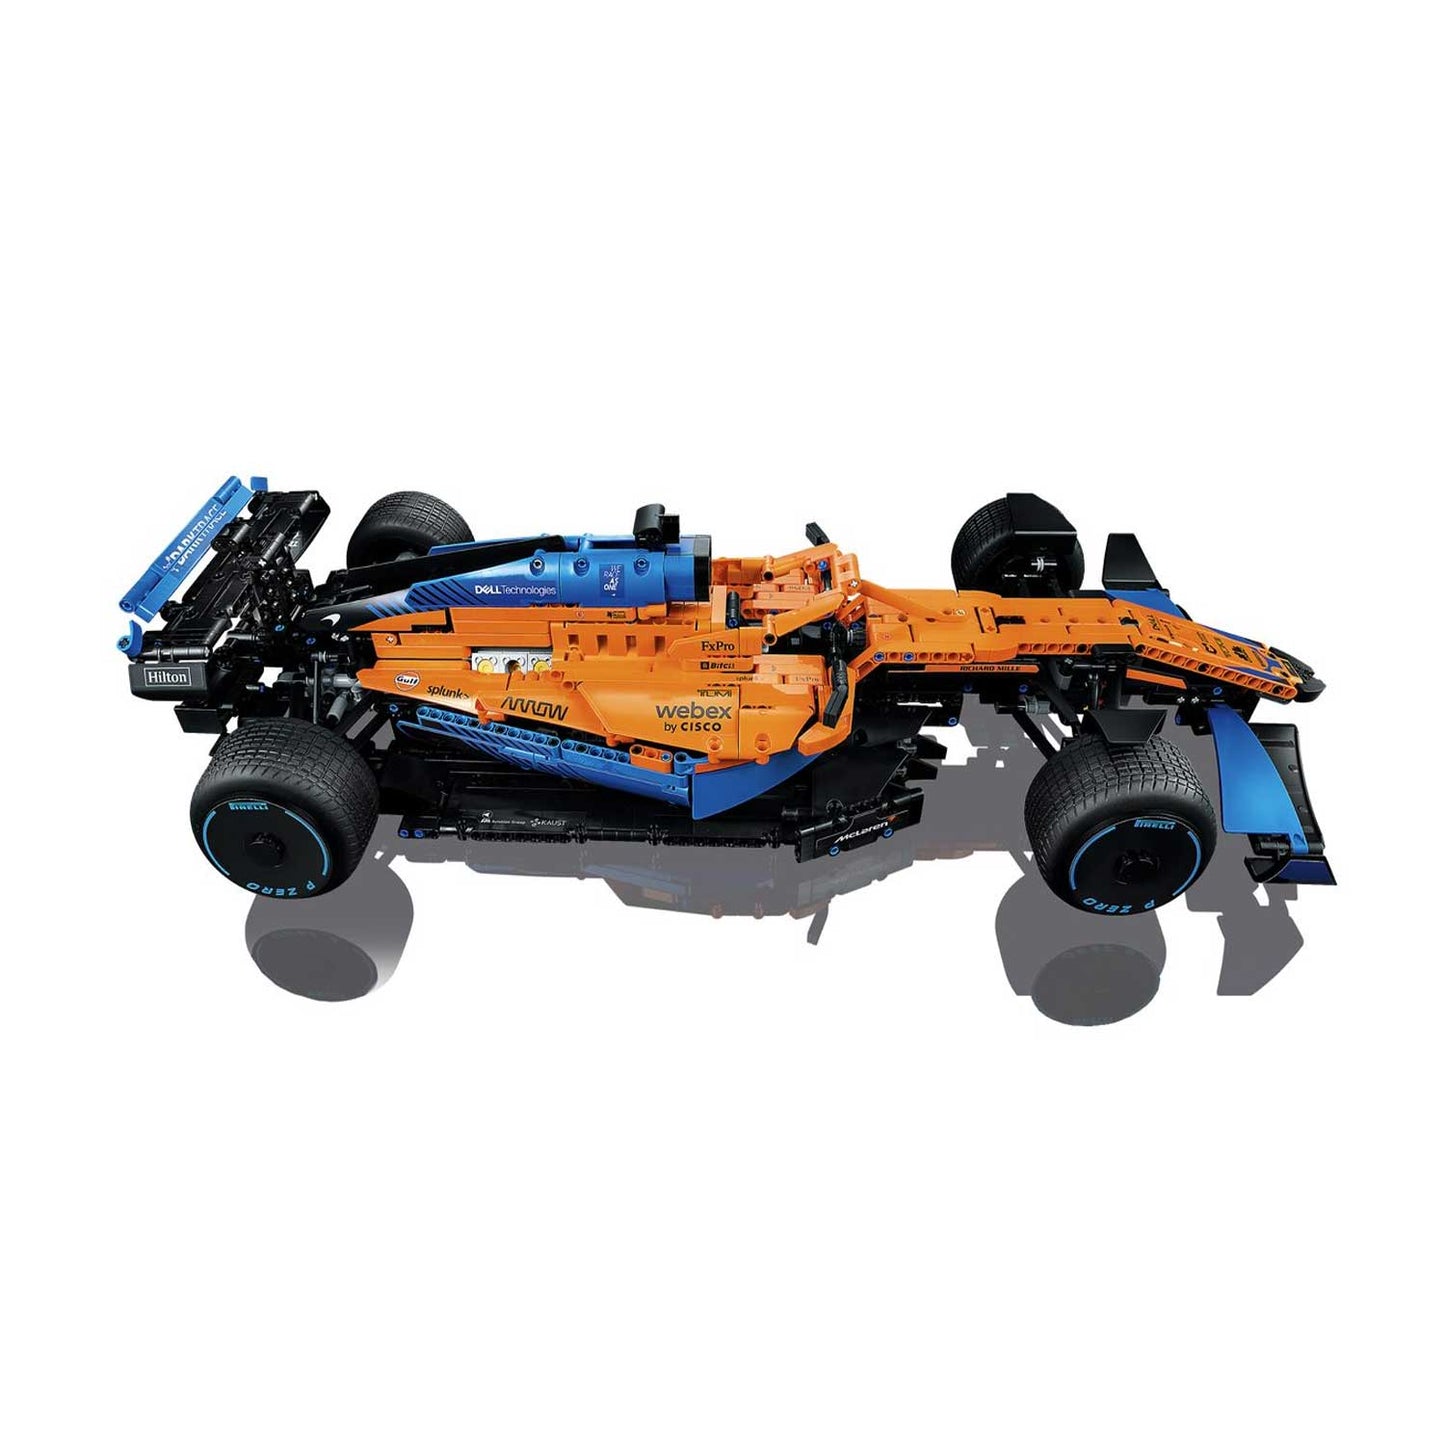 Lego - Technic McLaren Formula 1 single seater with or without Pirelli 42141 lettering